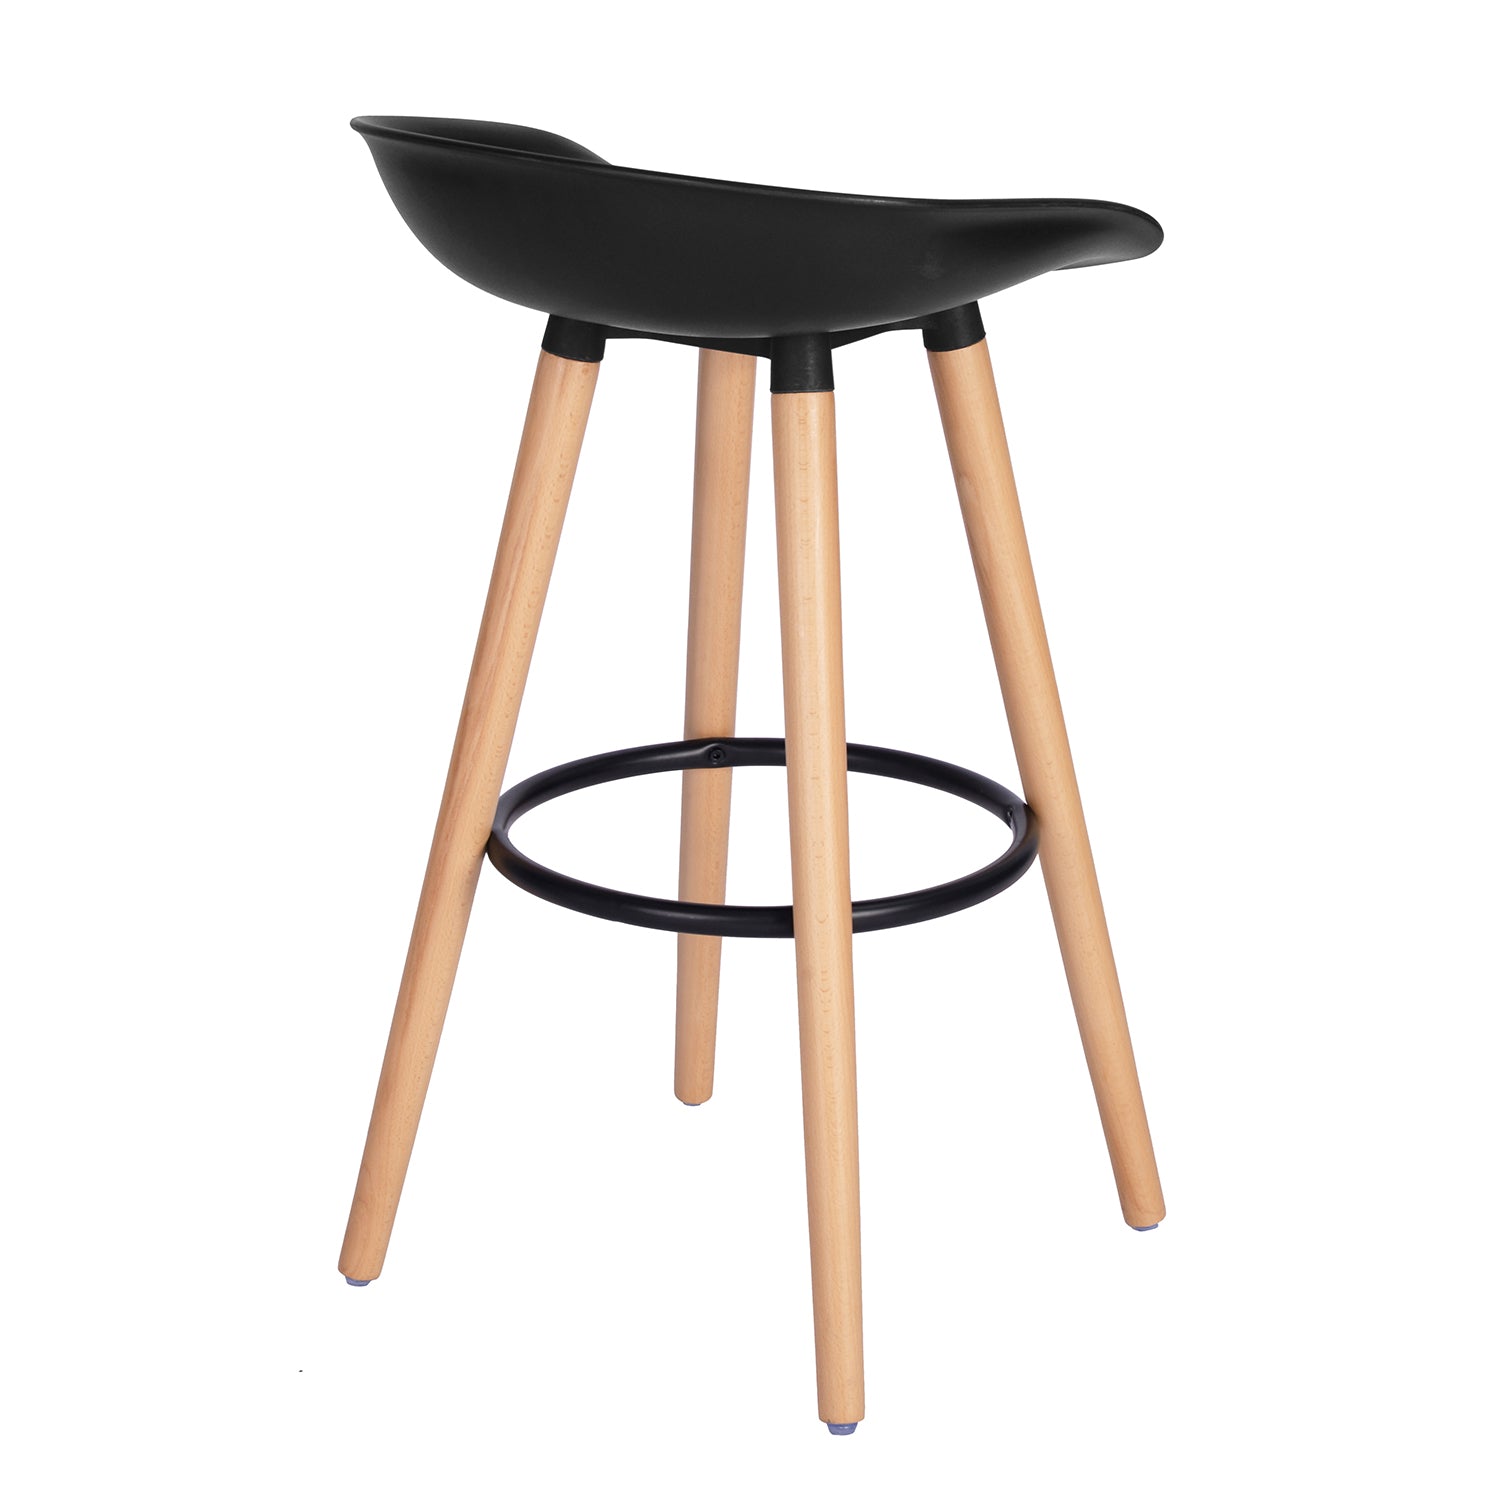 Set of 2 bar stools with footrest